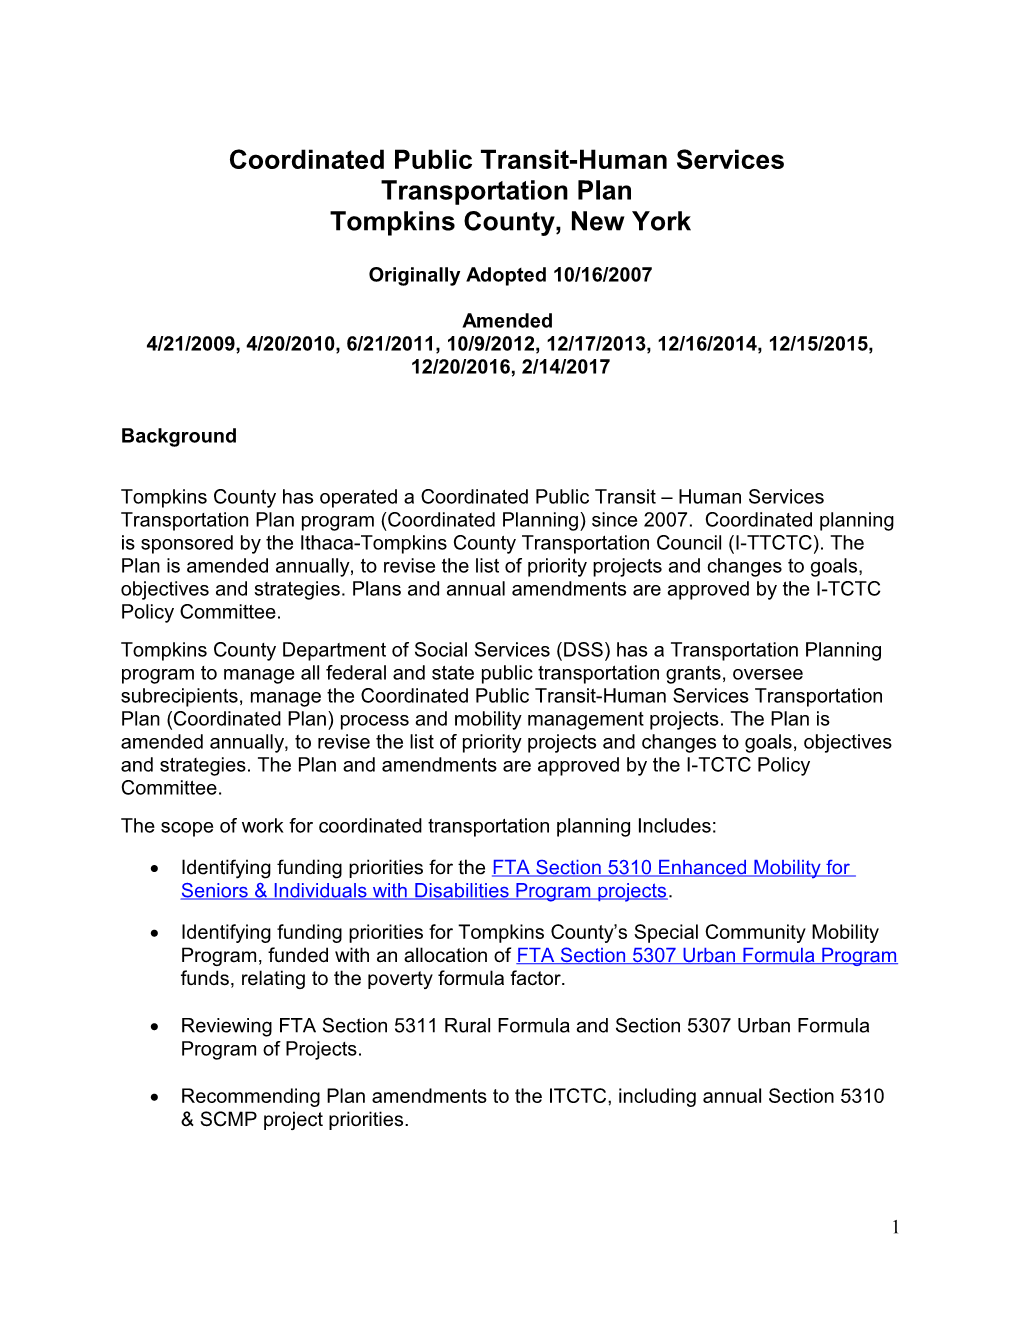 A Draft Coordinated Public Transit-Human Services Transportation Plan for Tompkins County